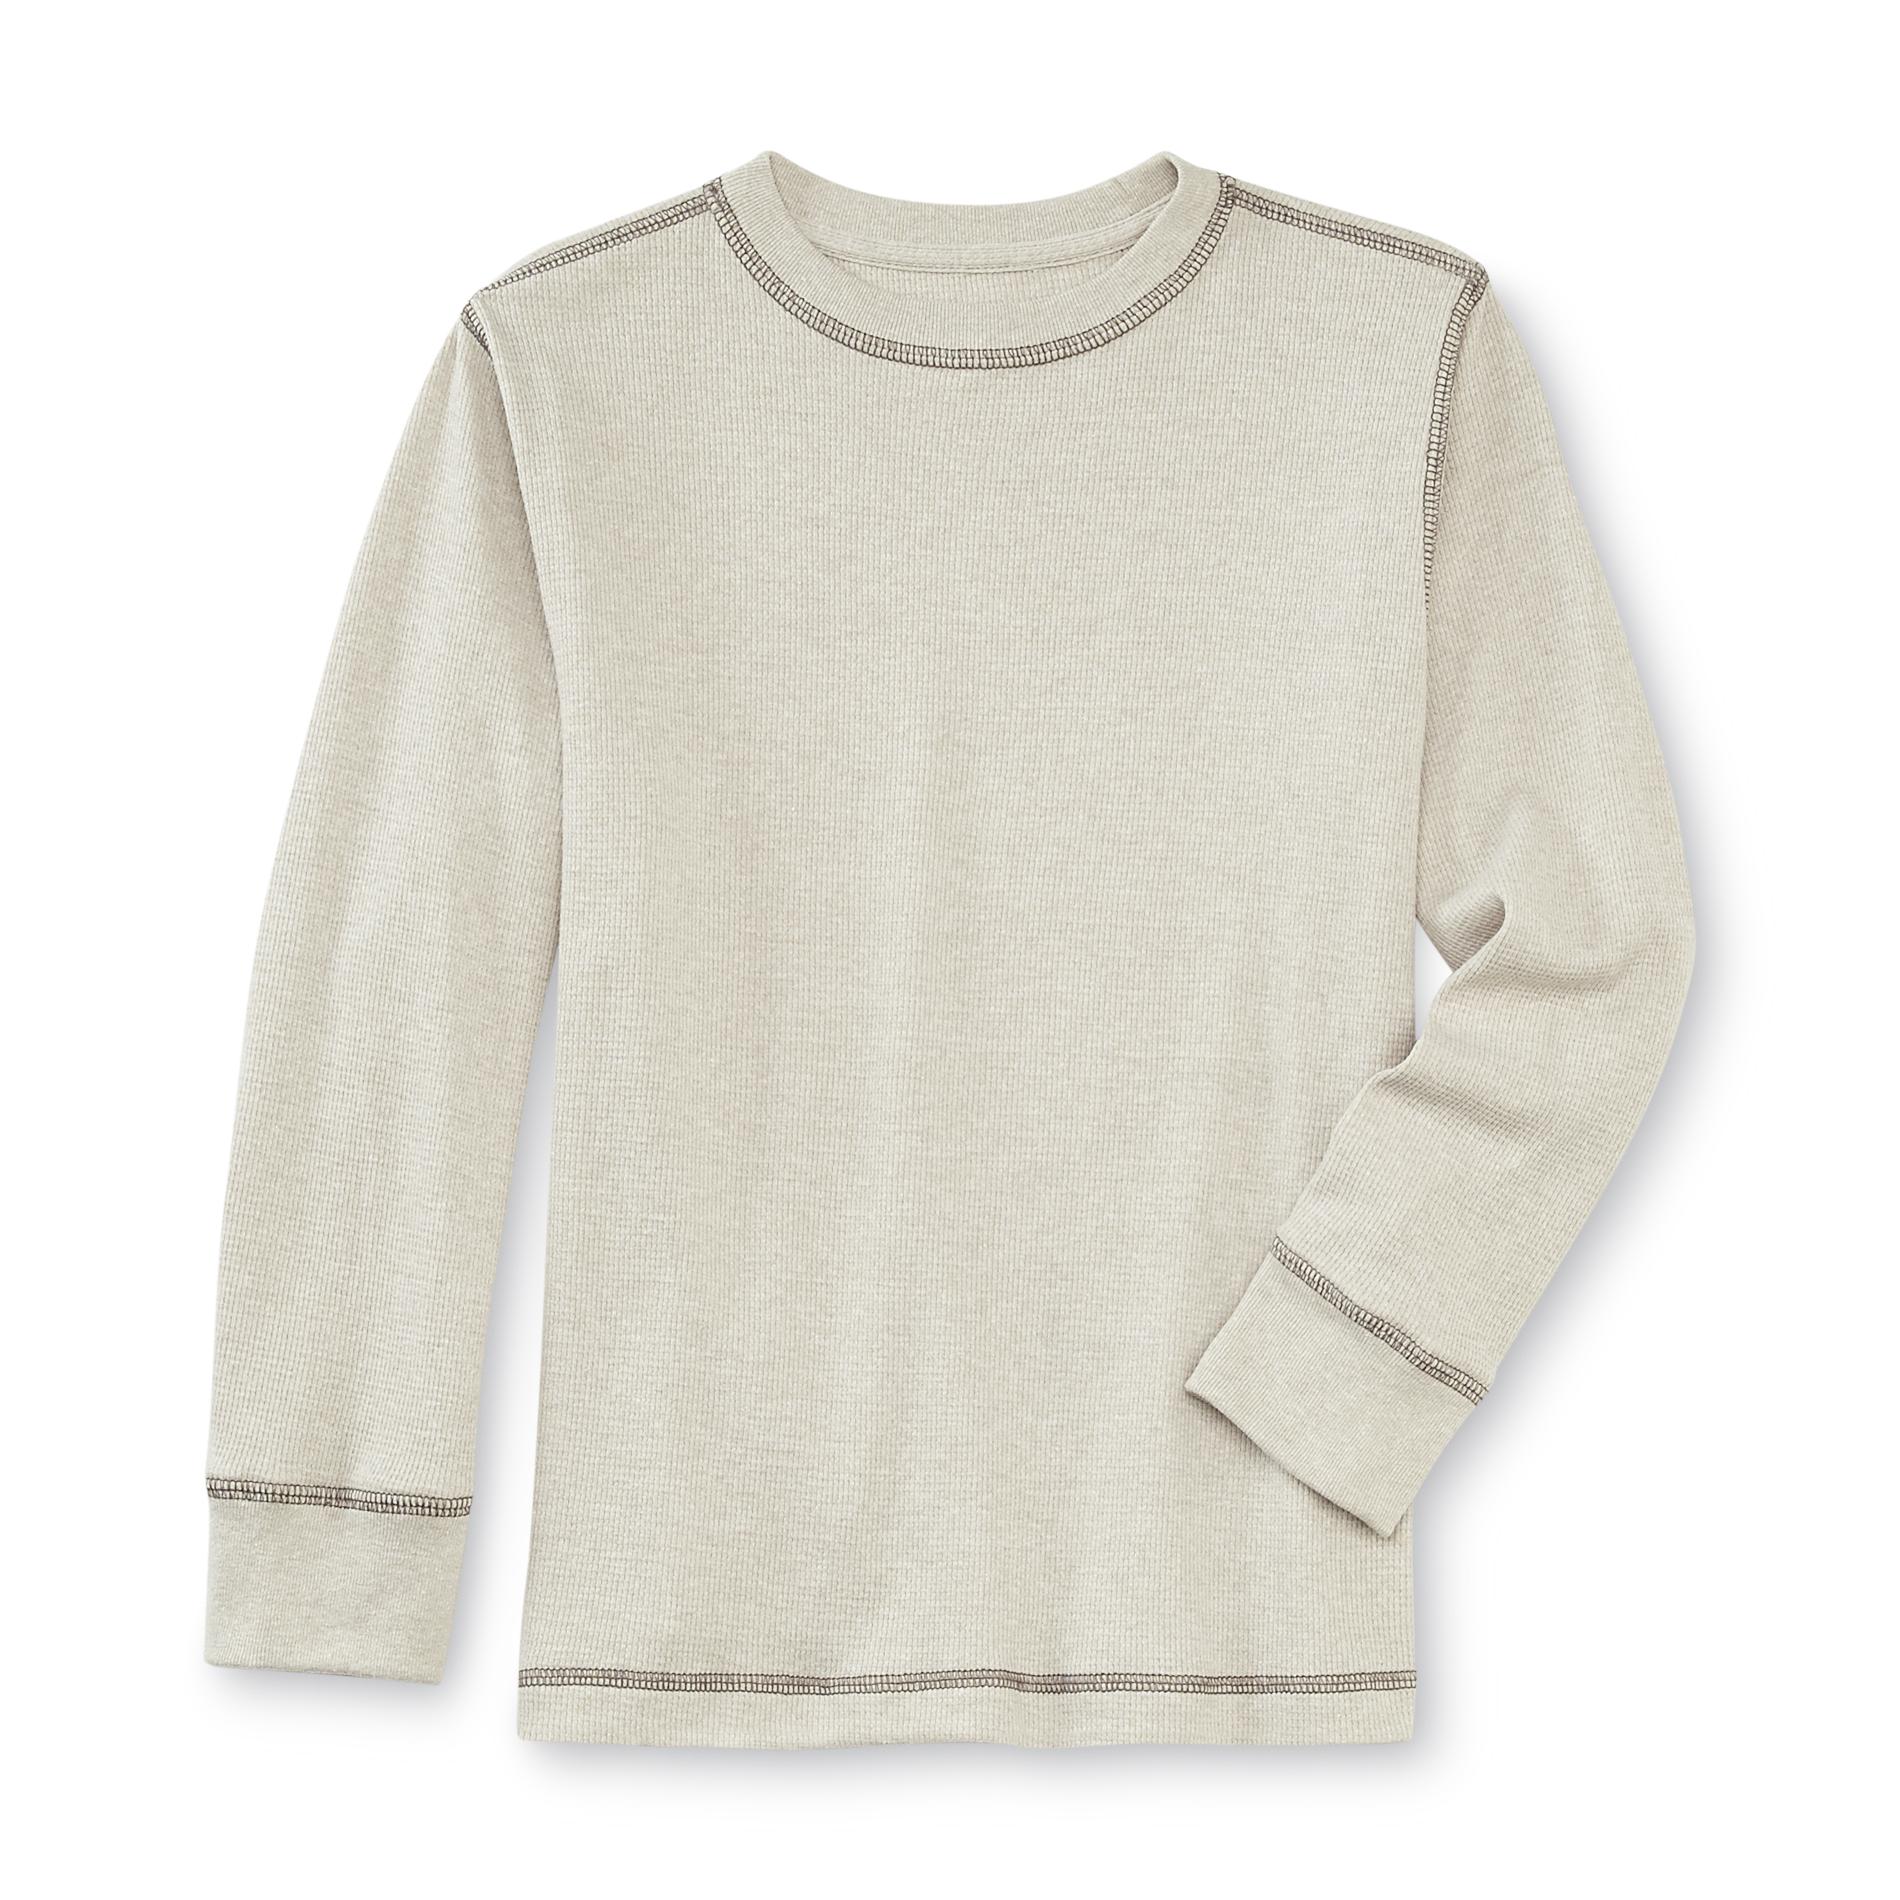 Basic Editions Boy's Thermal T-Shirt - Heathered